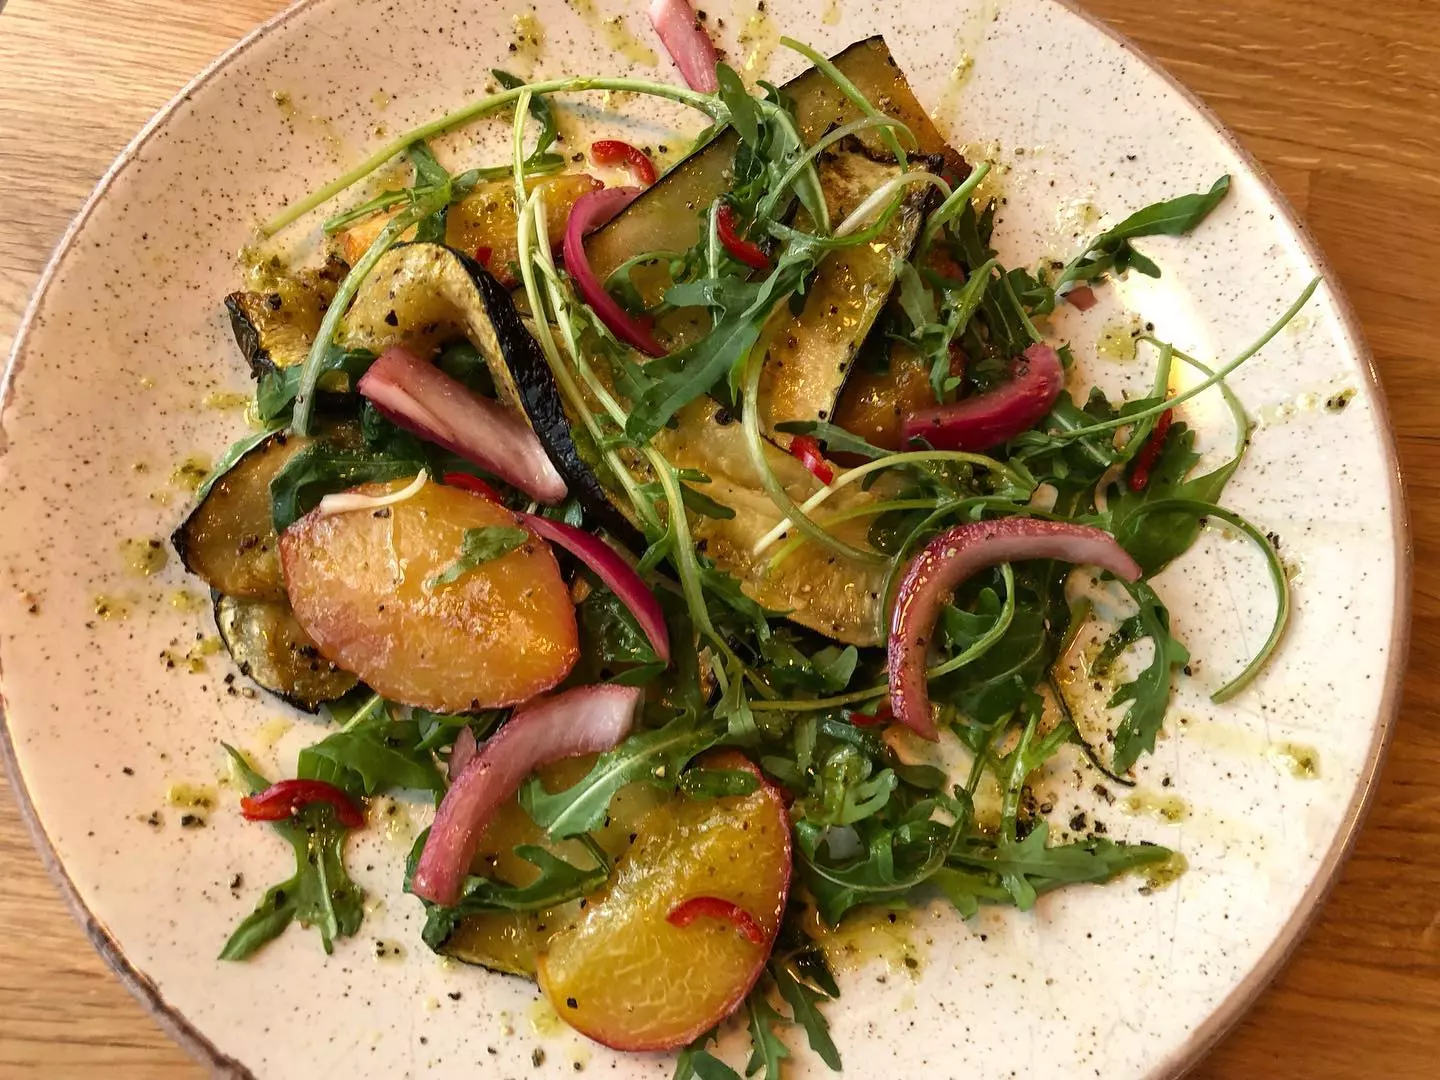 Grilled peaches & courgette w/ pickled onions, fresh chilli & lemon, garlic, parsley dressing